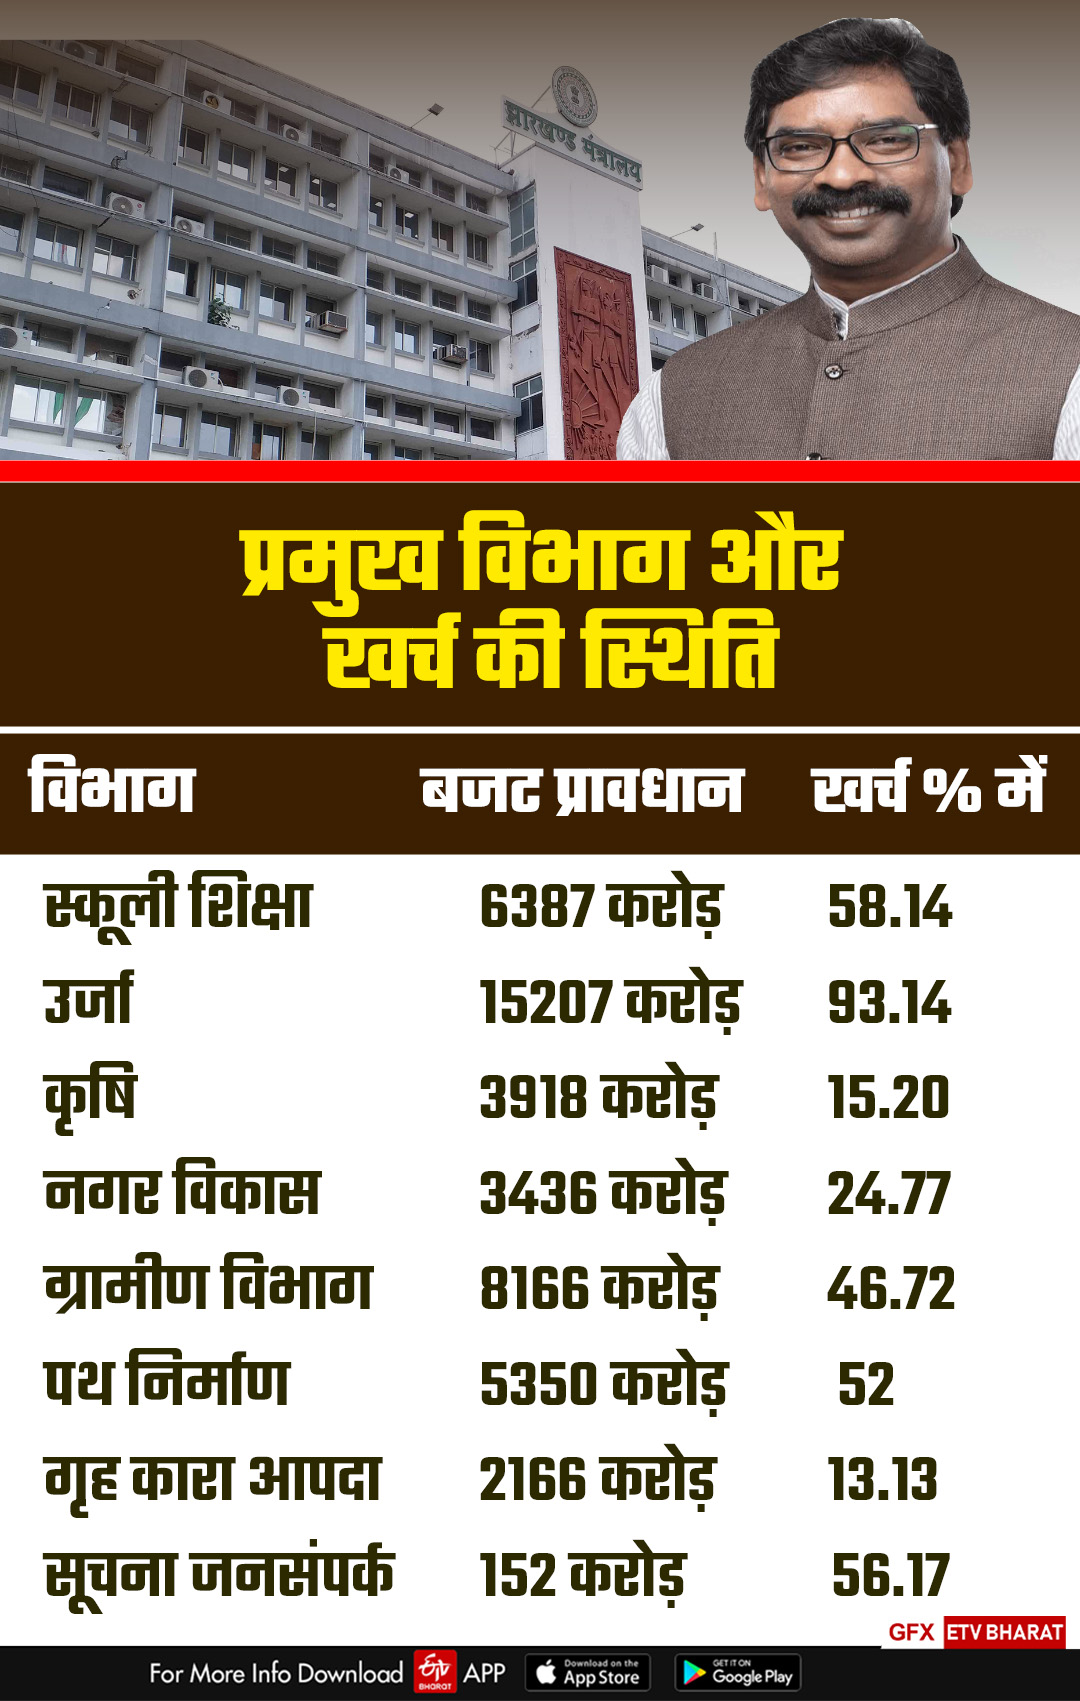 Department wise budget expenditure in Jharkhand